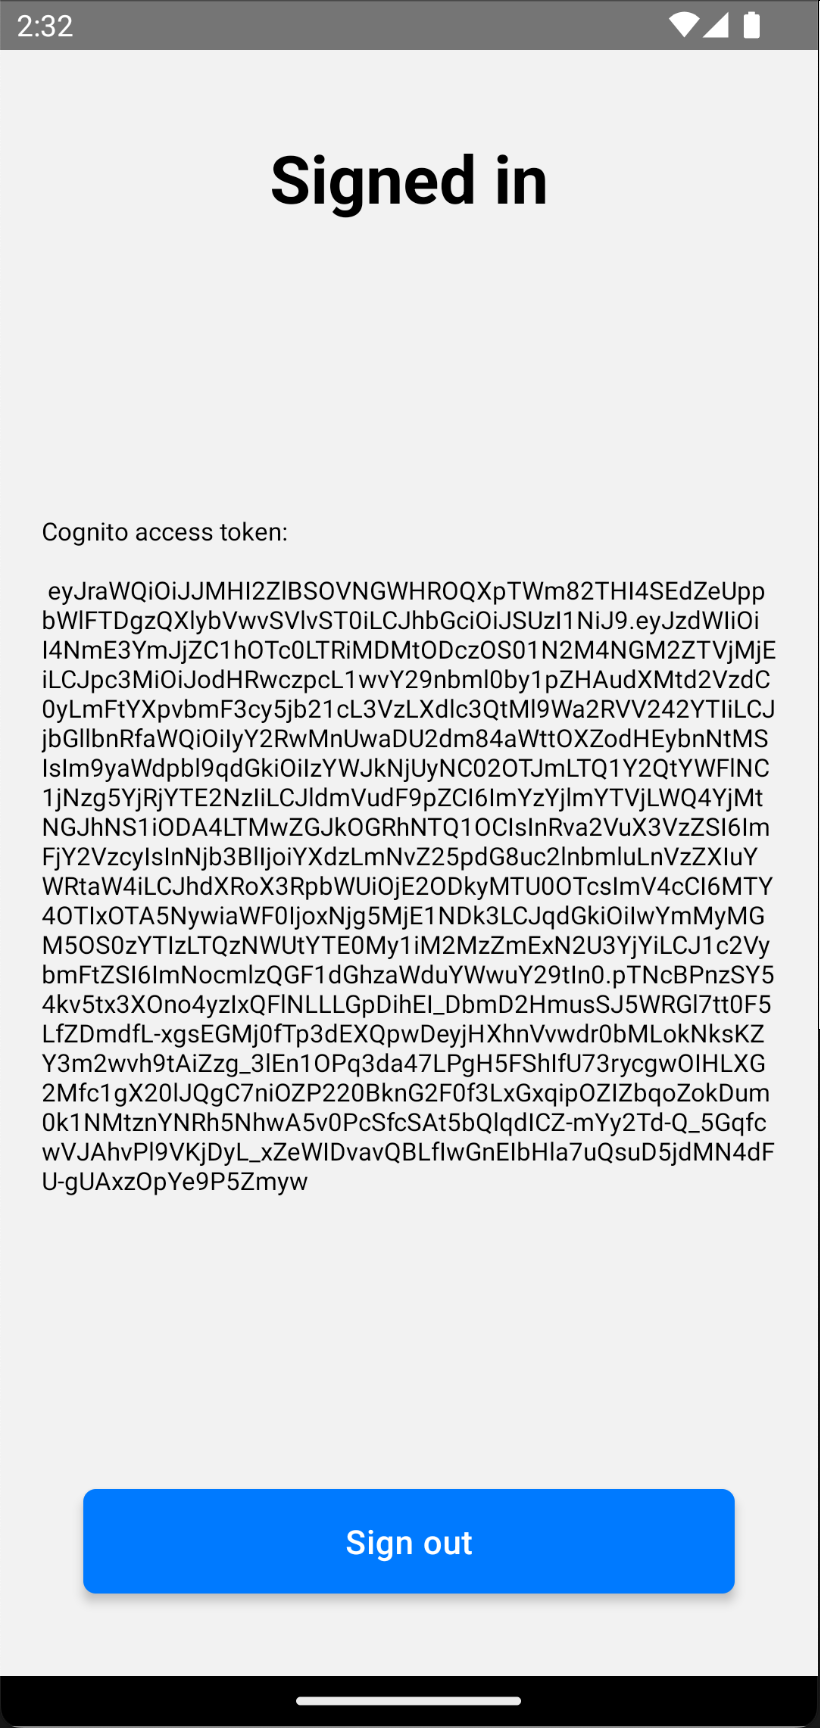 Cognito access token (Android)